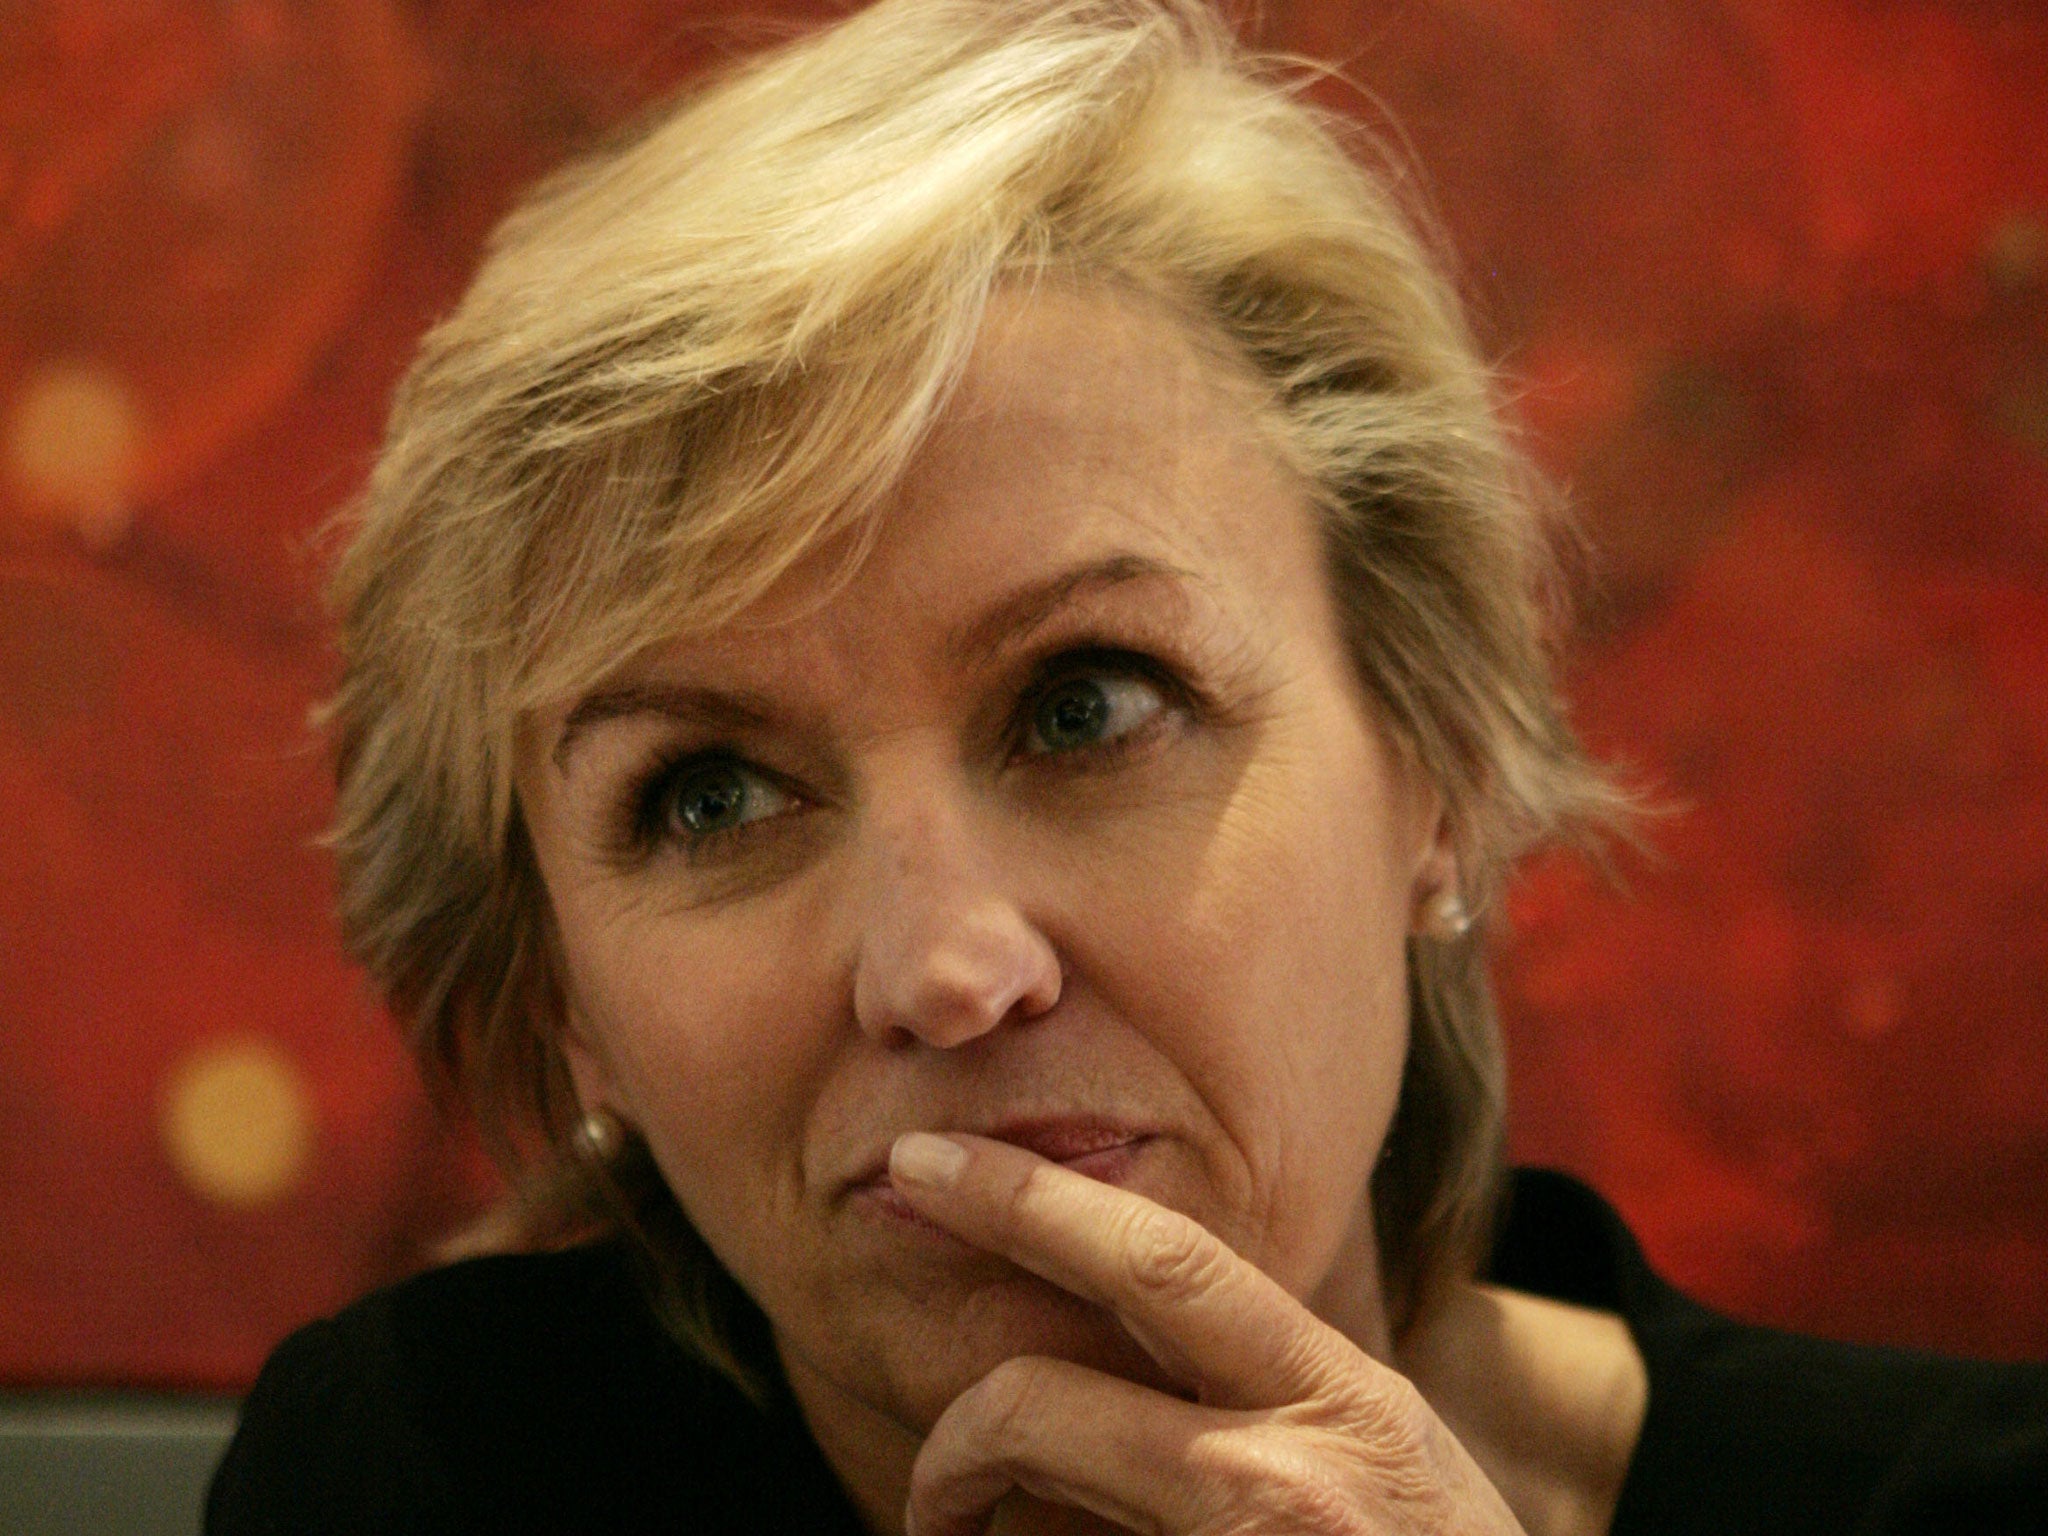 Tina Brown wrote about Princess Diana in ‘The Diana Chronicles’